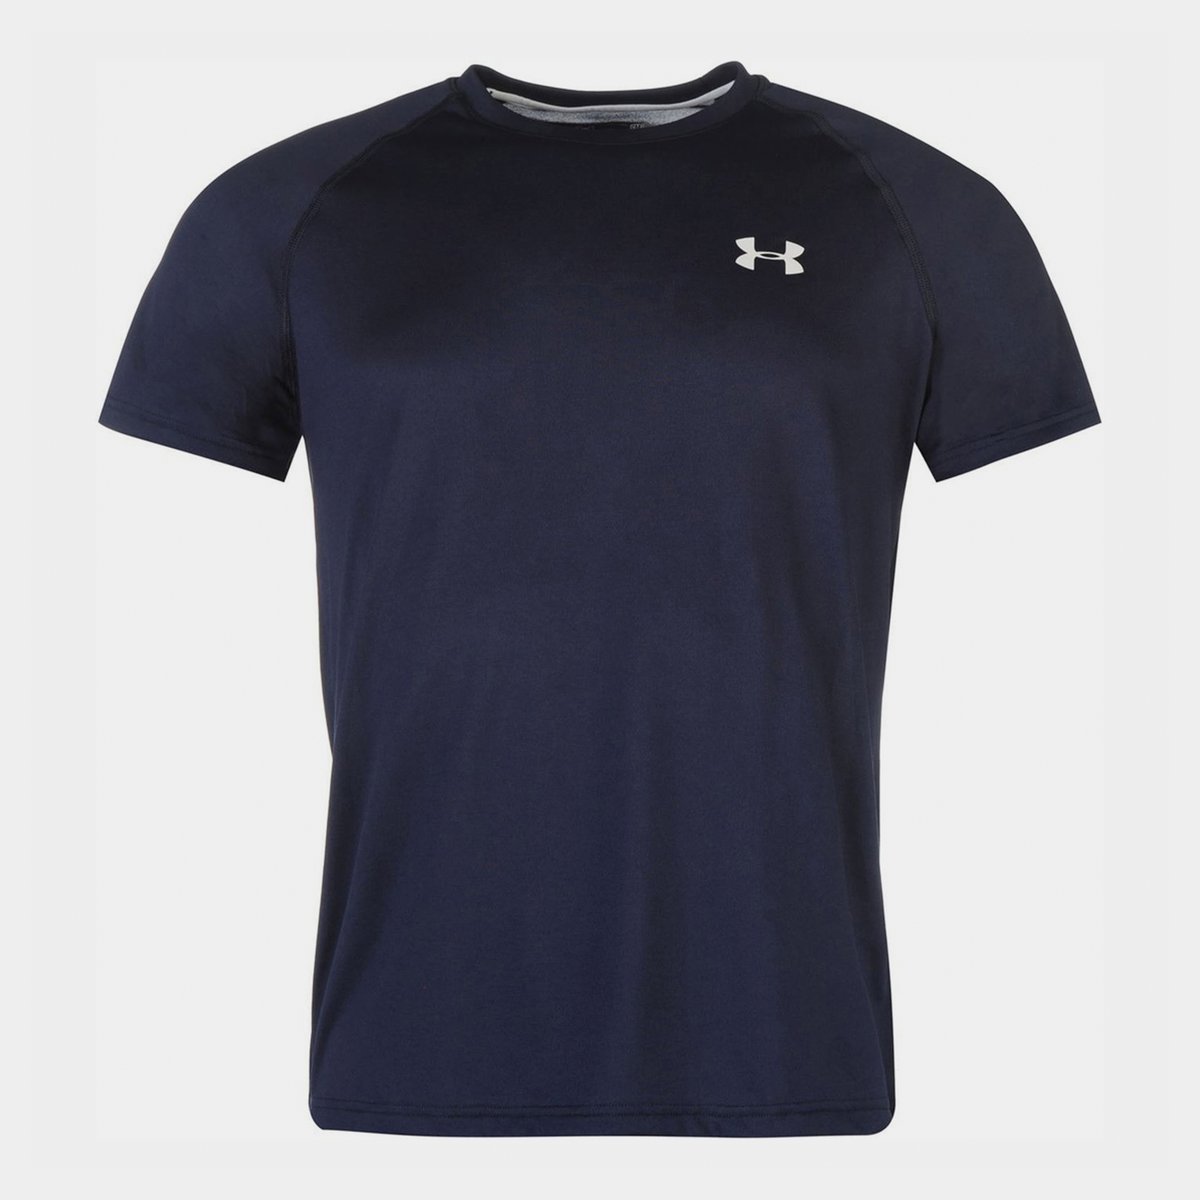 Under Armour Rugby Clothing - Lovell Rugby